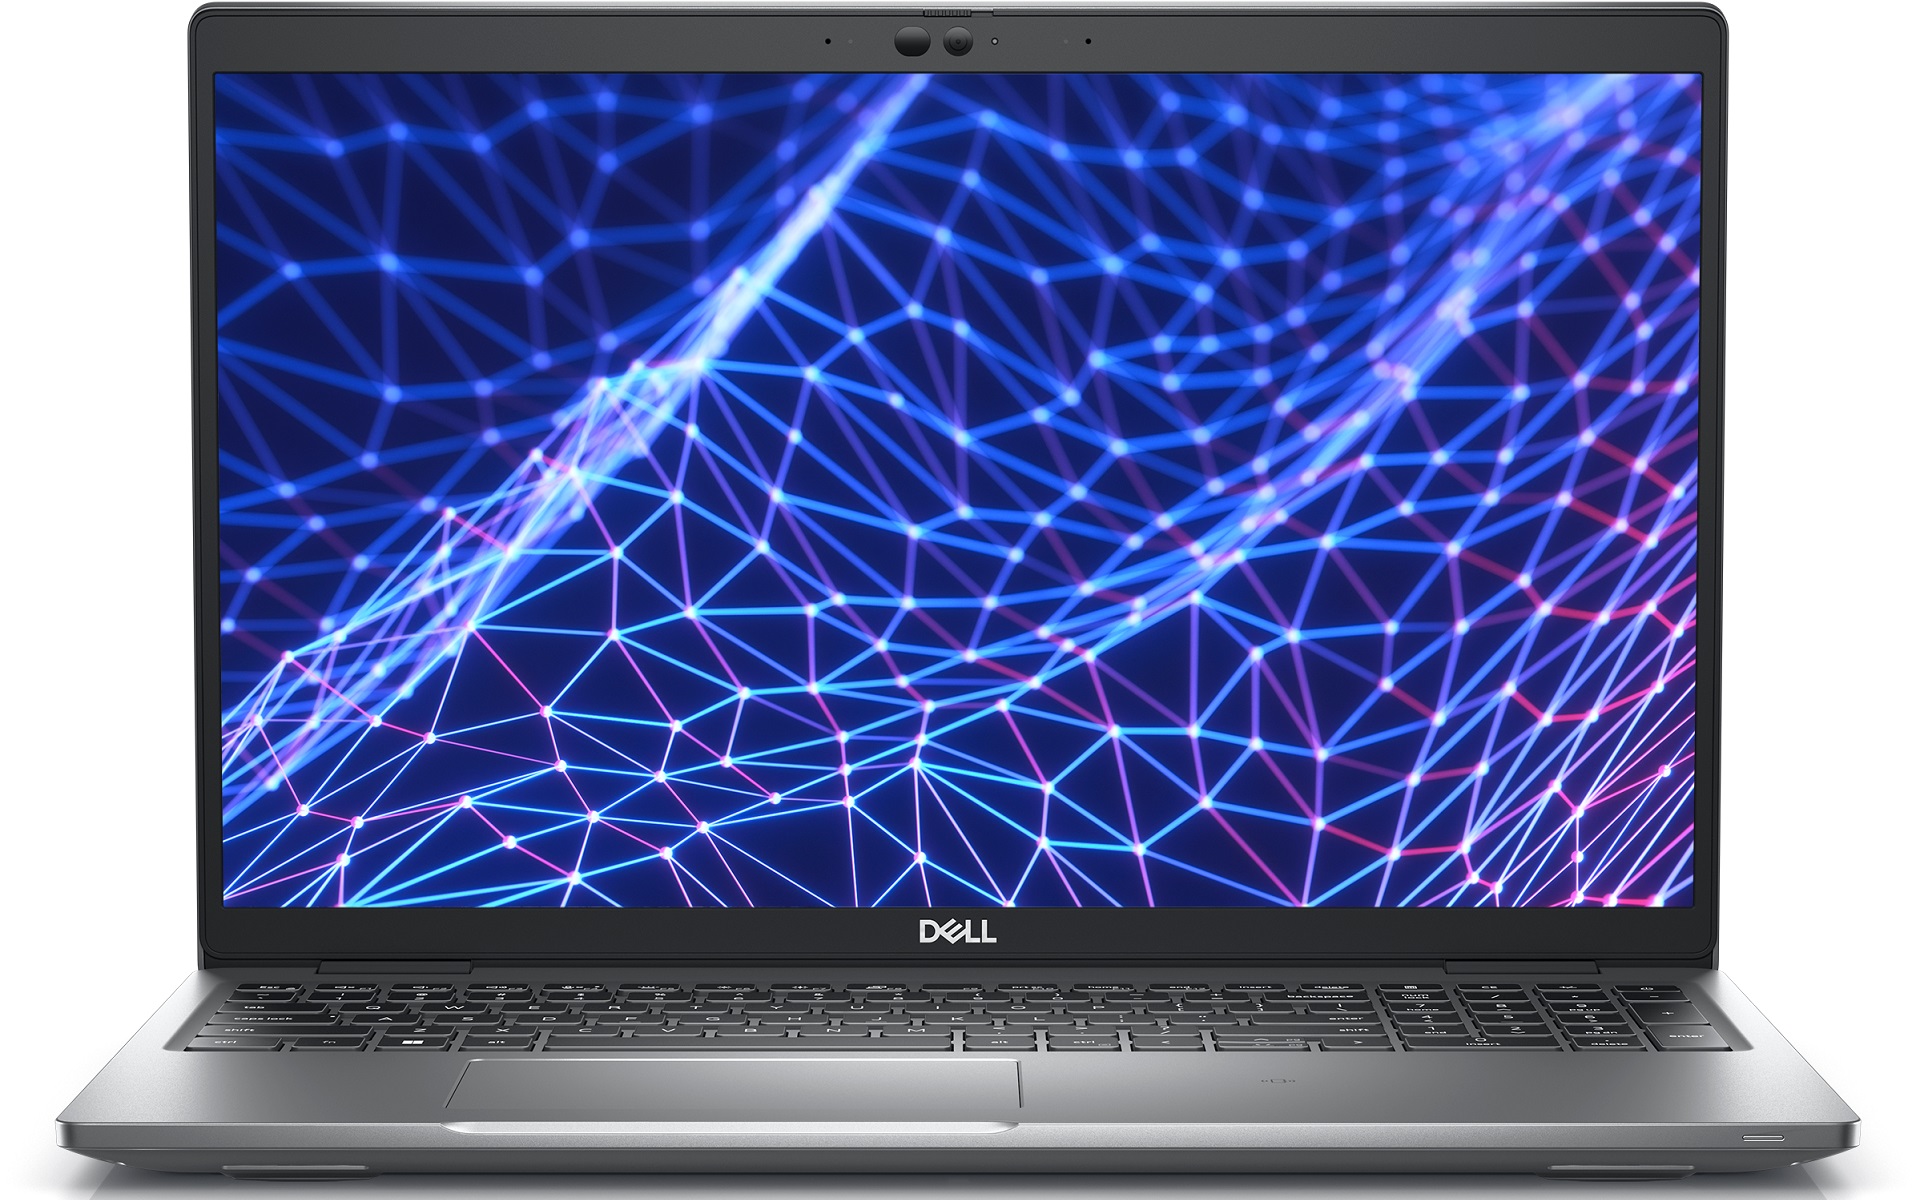 Dell Latitude 15 5530 - Specs, Tests, and Prices 